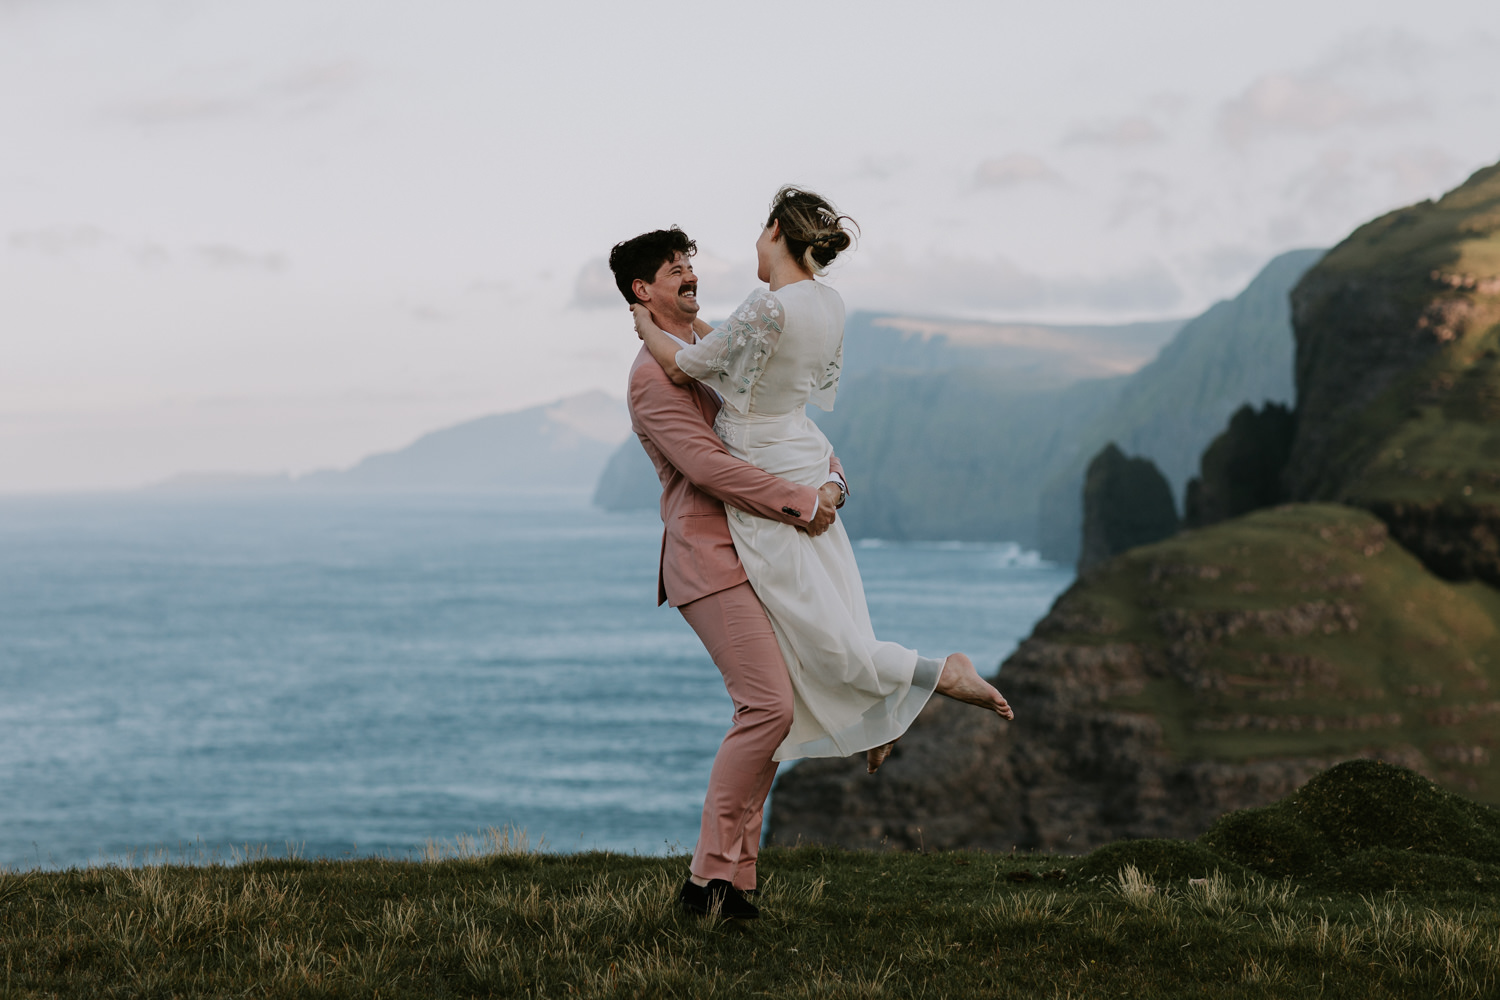 A man wearing a pink suit picks up his partner in a white wedding dress with dramatic sea cliffs in the background